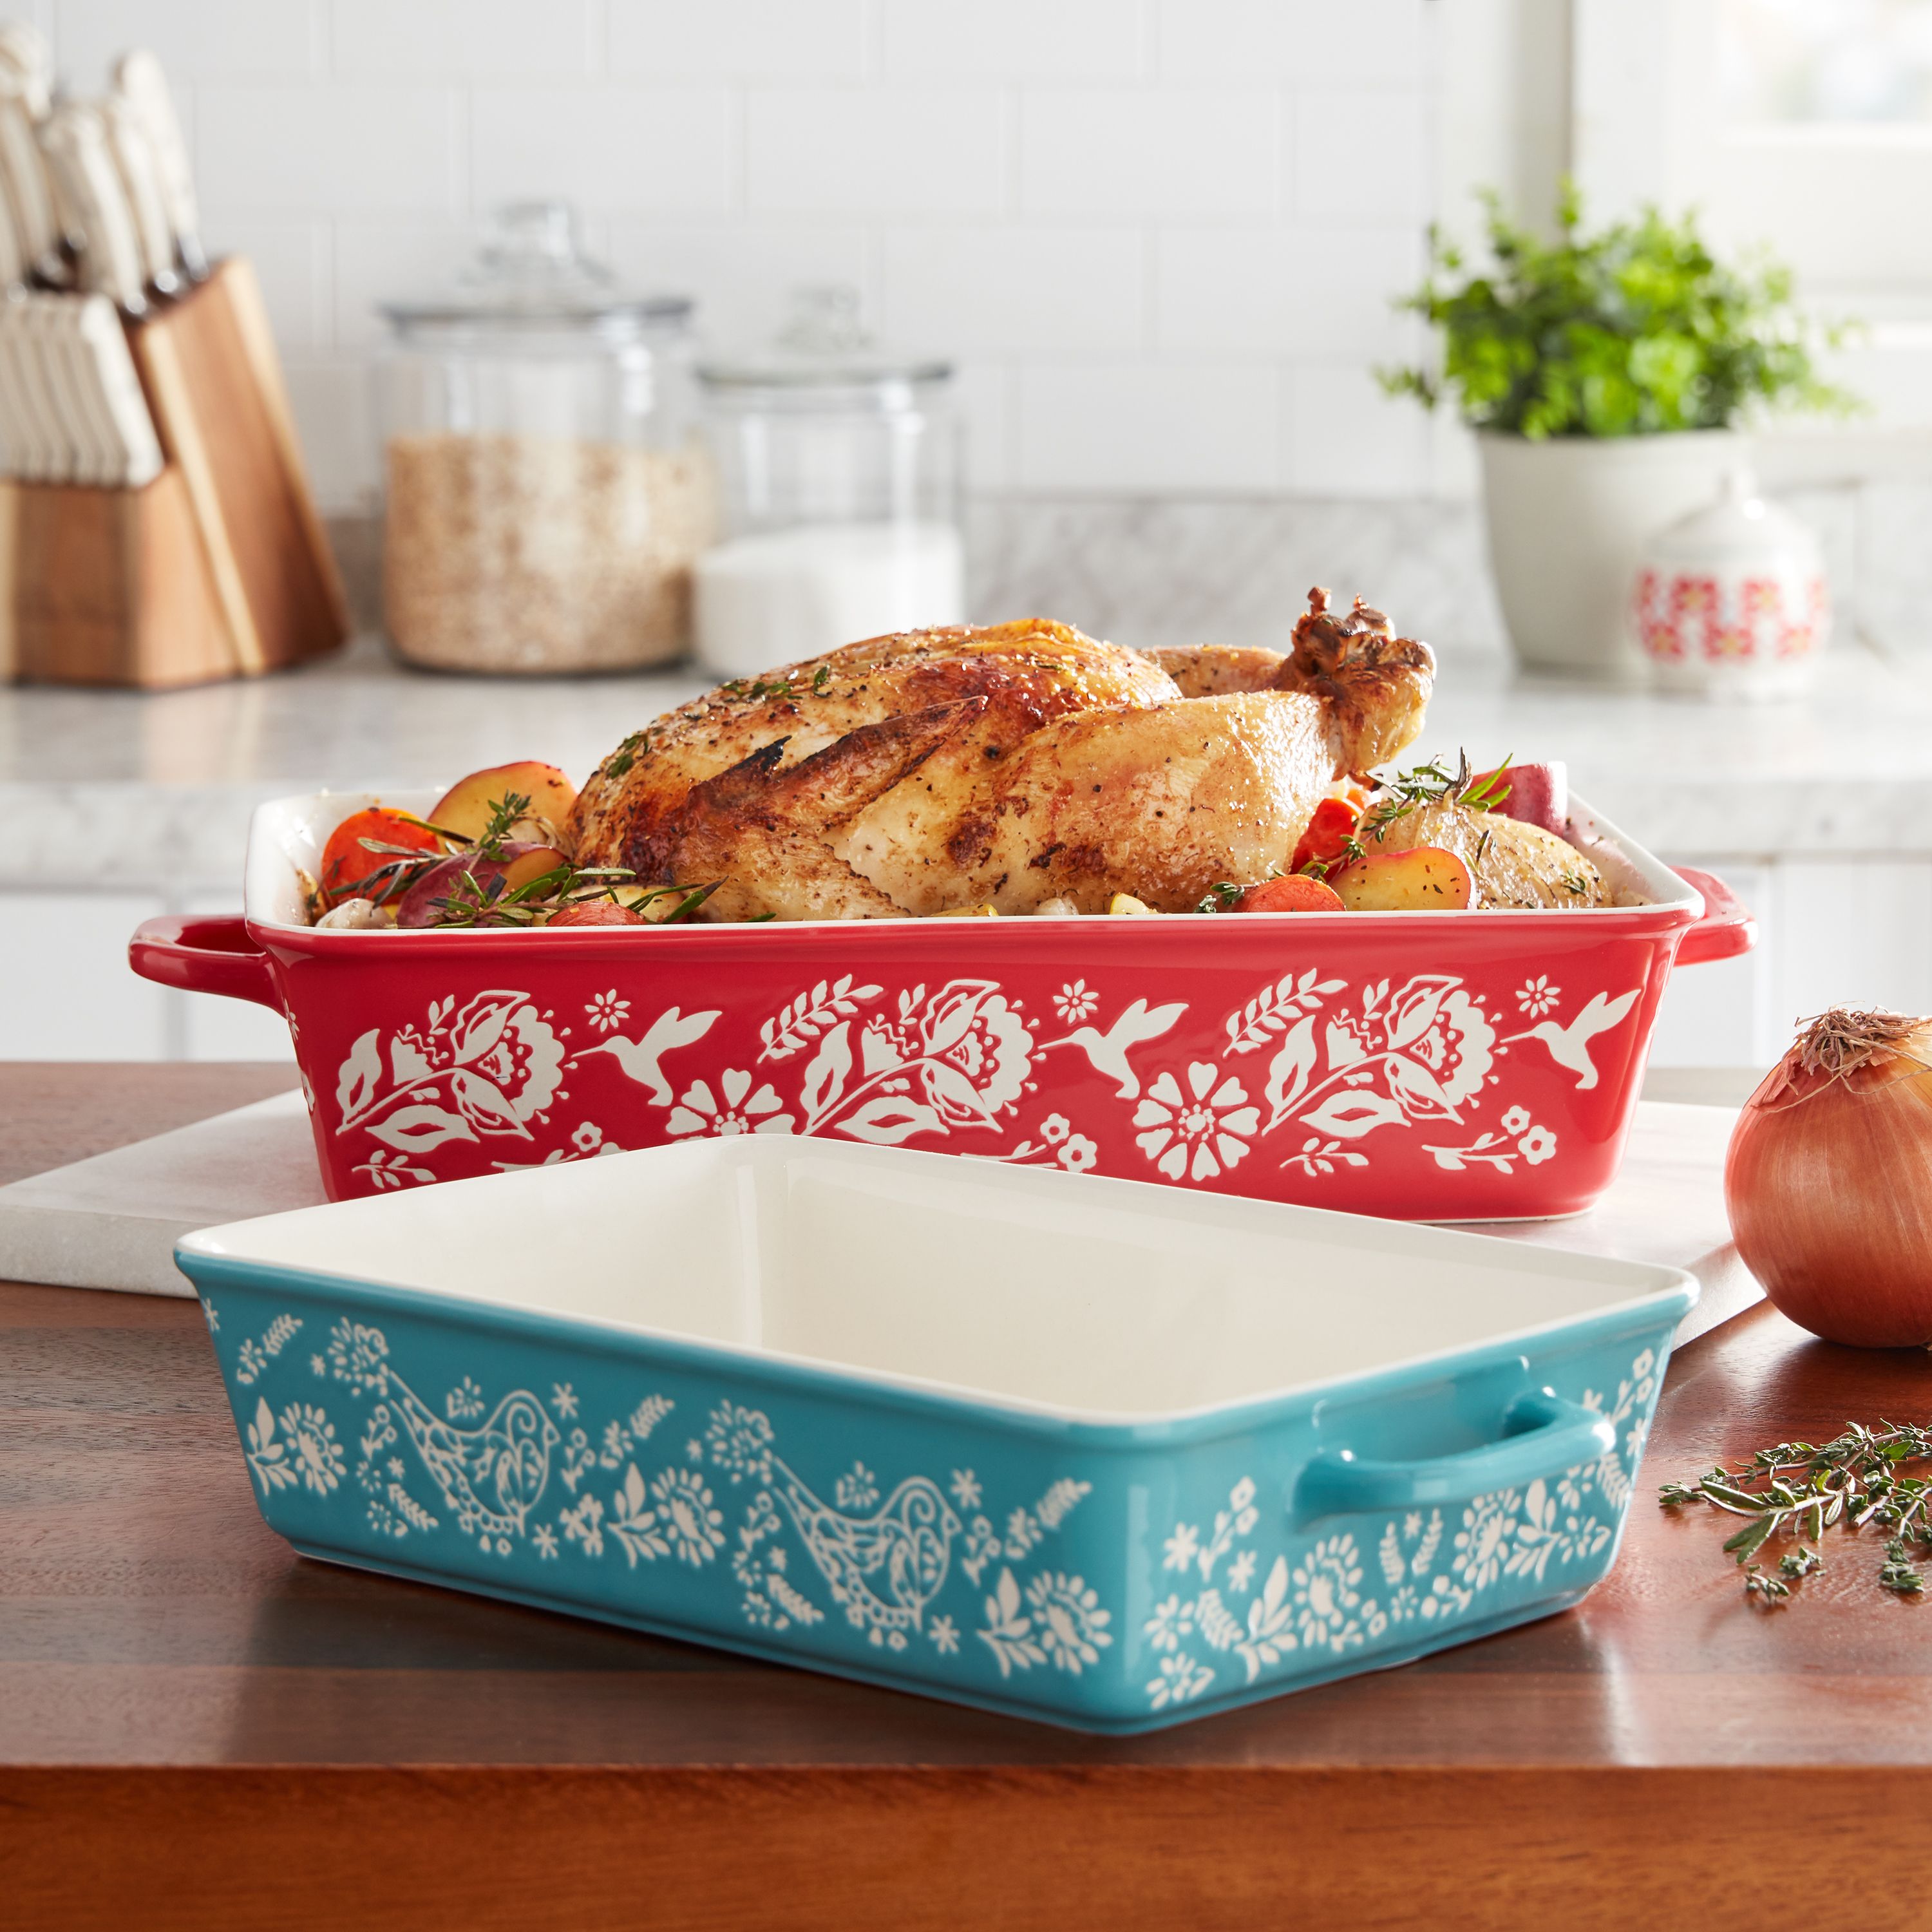 The Pioneer Woman Sweet Romance Blossoms Red, Teal 2-Piece Rectangular Ceramic Baking Dish - image 1 of 11